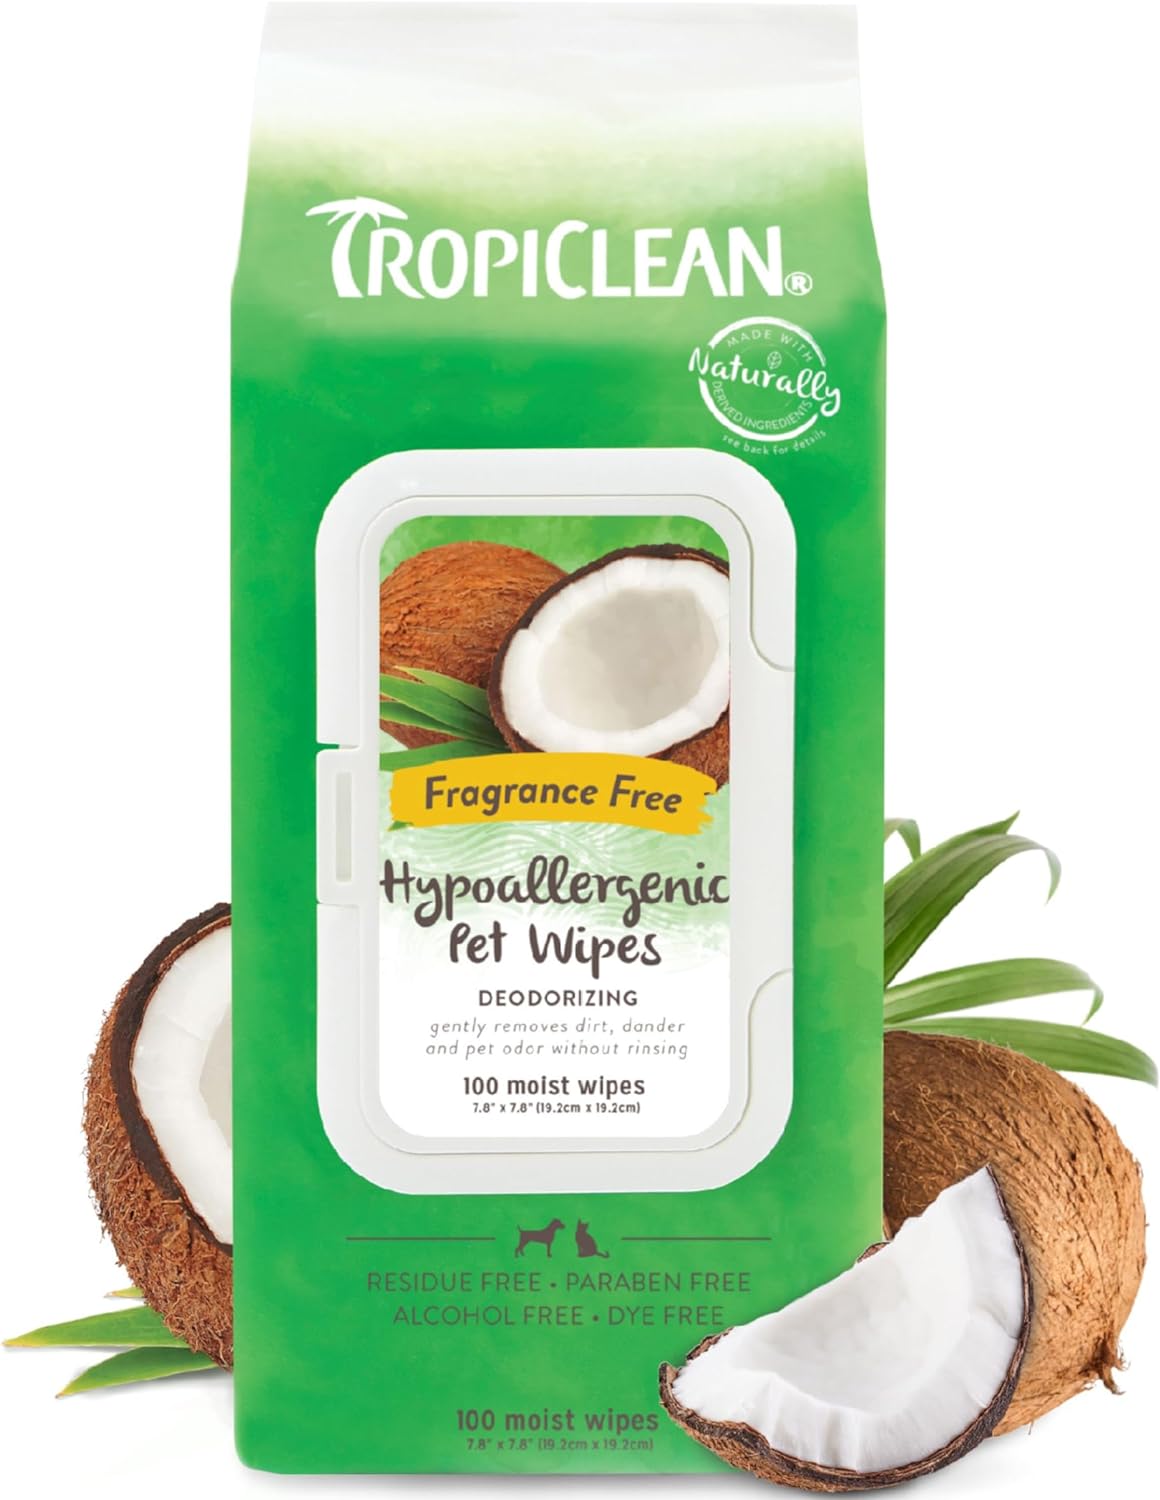 TropiClean Hypoallergenic Dog Wipes for Paws and Butt | Fragrance Free Dog Grooming Wipes | Safe for The Face | Puppy & Cat Friendly | 100 Count